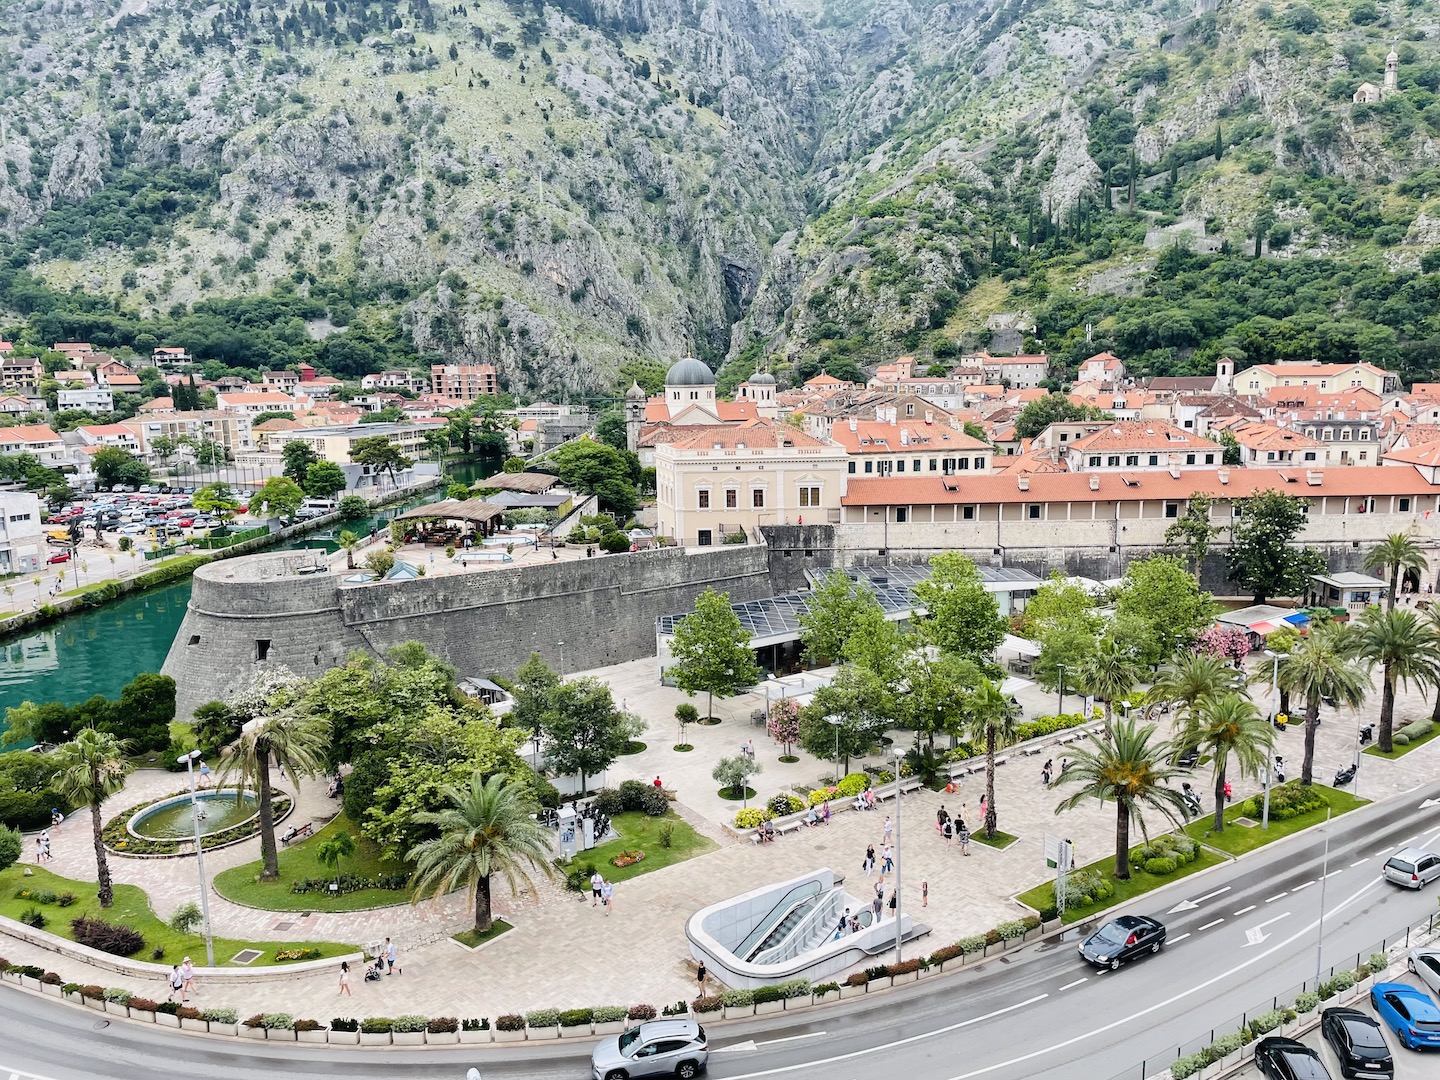 The medieval Kotor's walled city is surrounded by mountains and a paved promenade with palm trees.